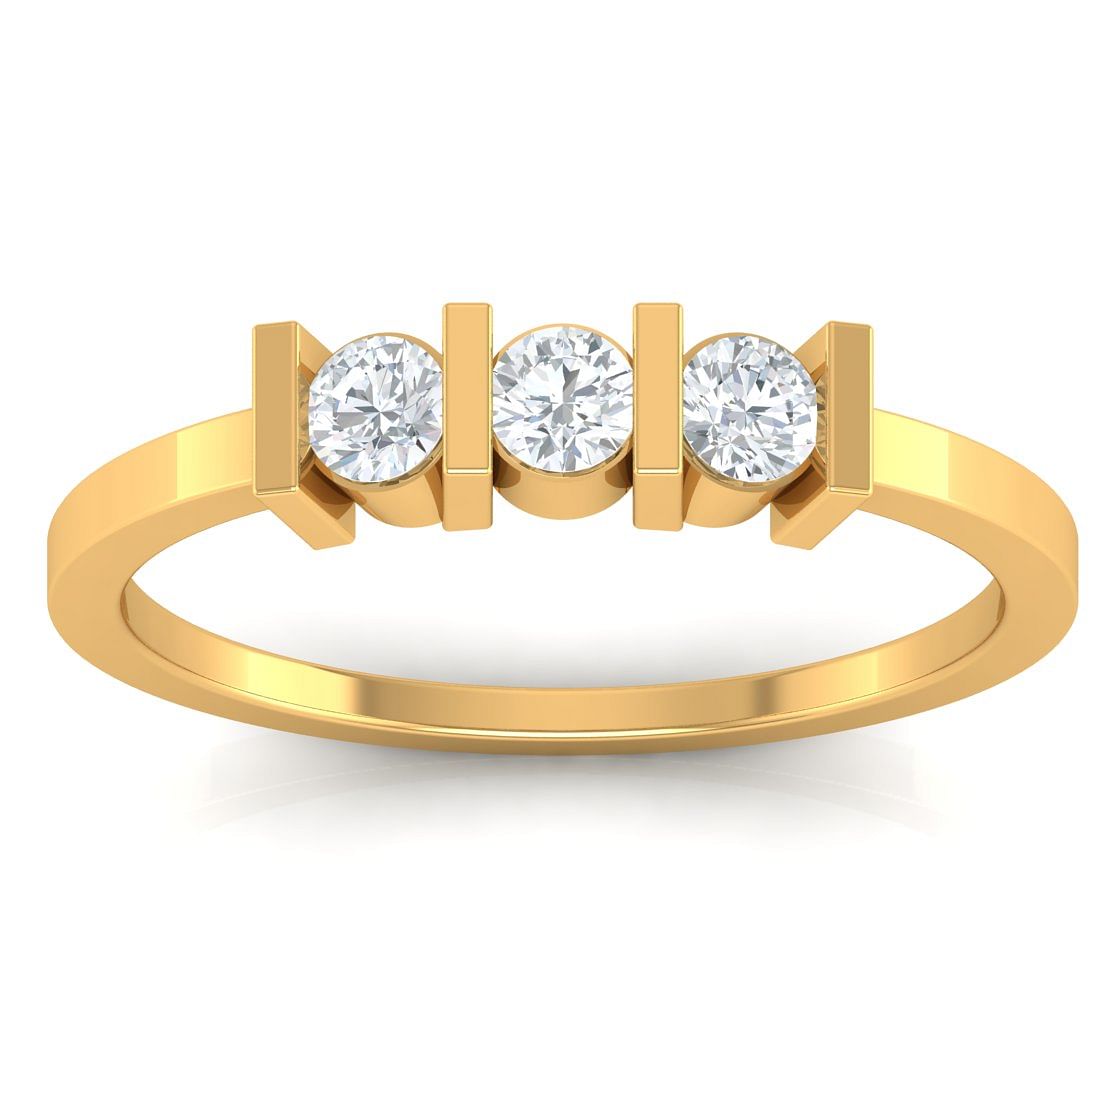 ROUND ENGAGEMENT RING | SOLITAIRE JEWELS DUBAI, UAE – Solitaire Jewels